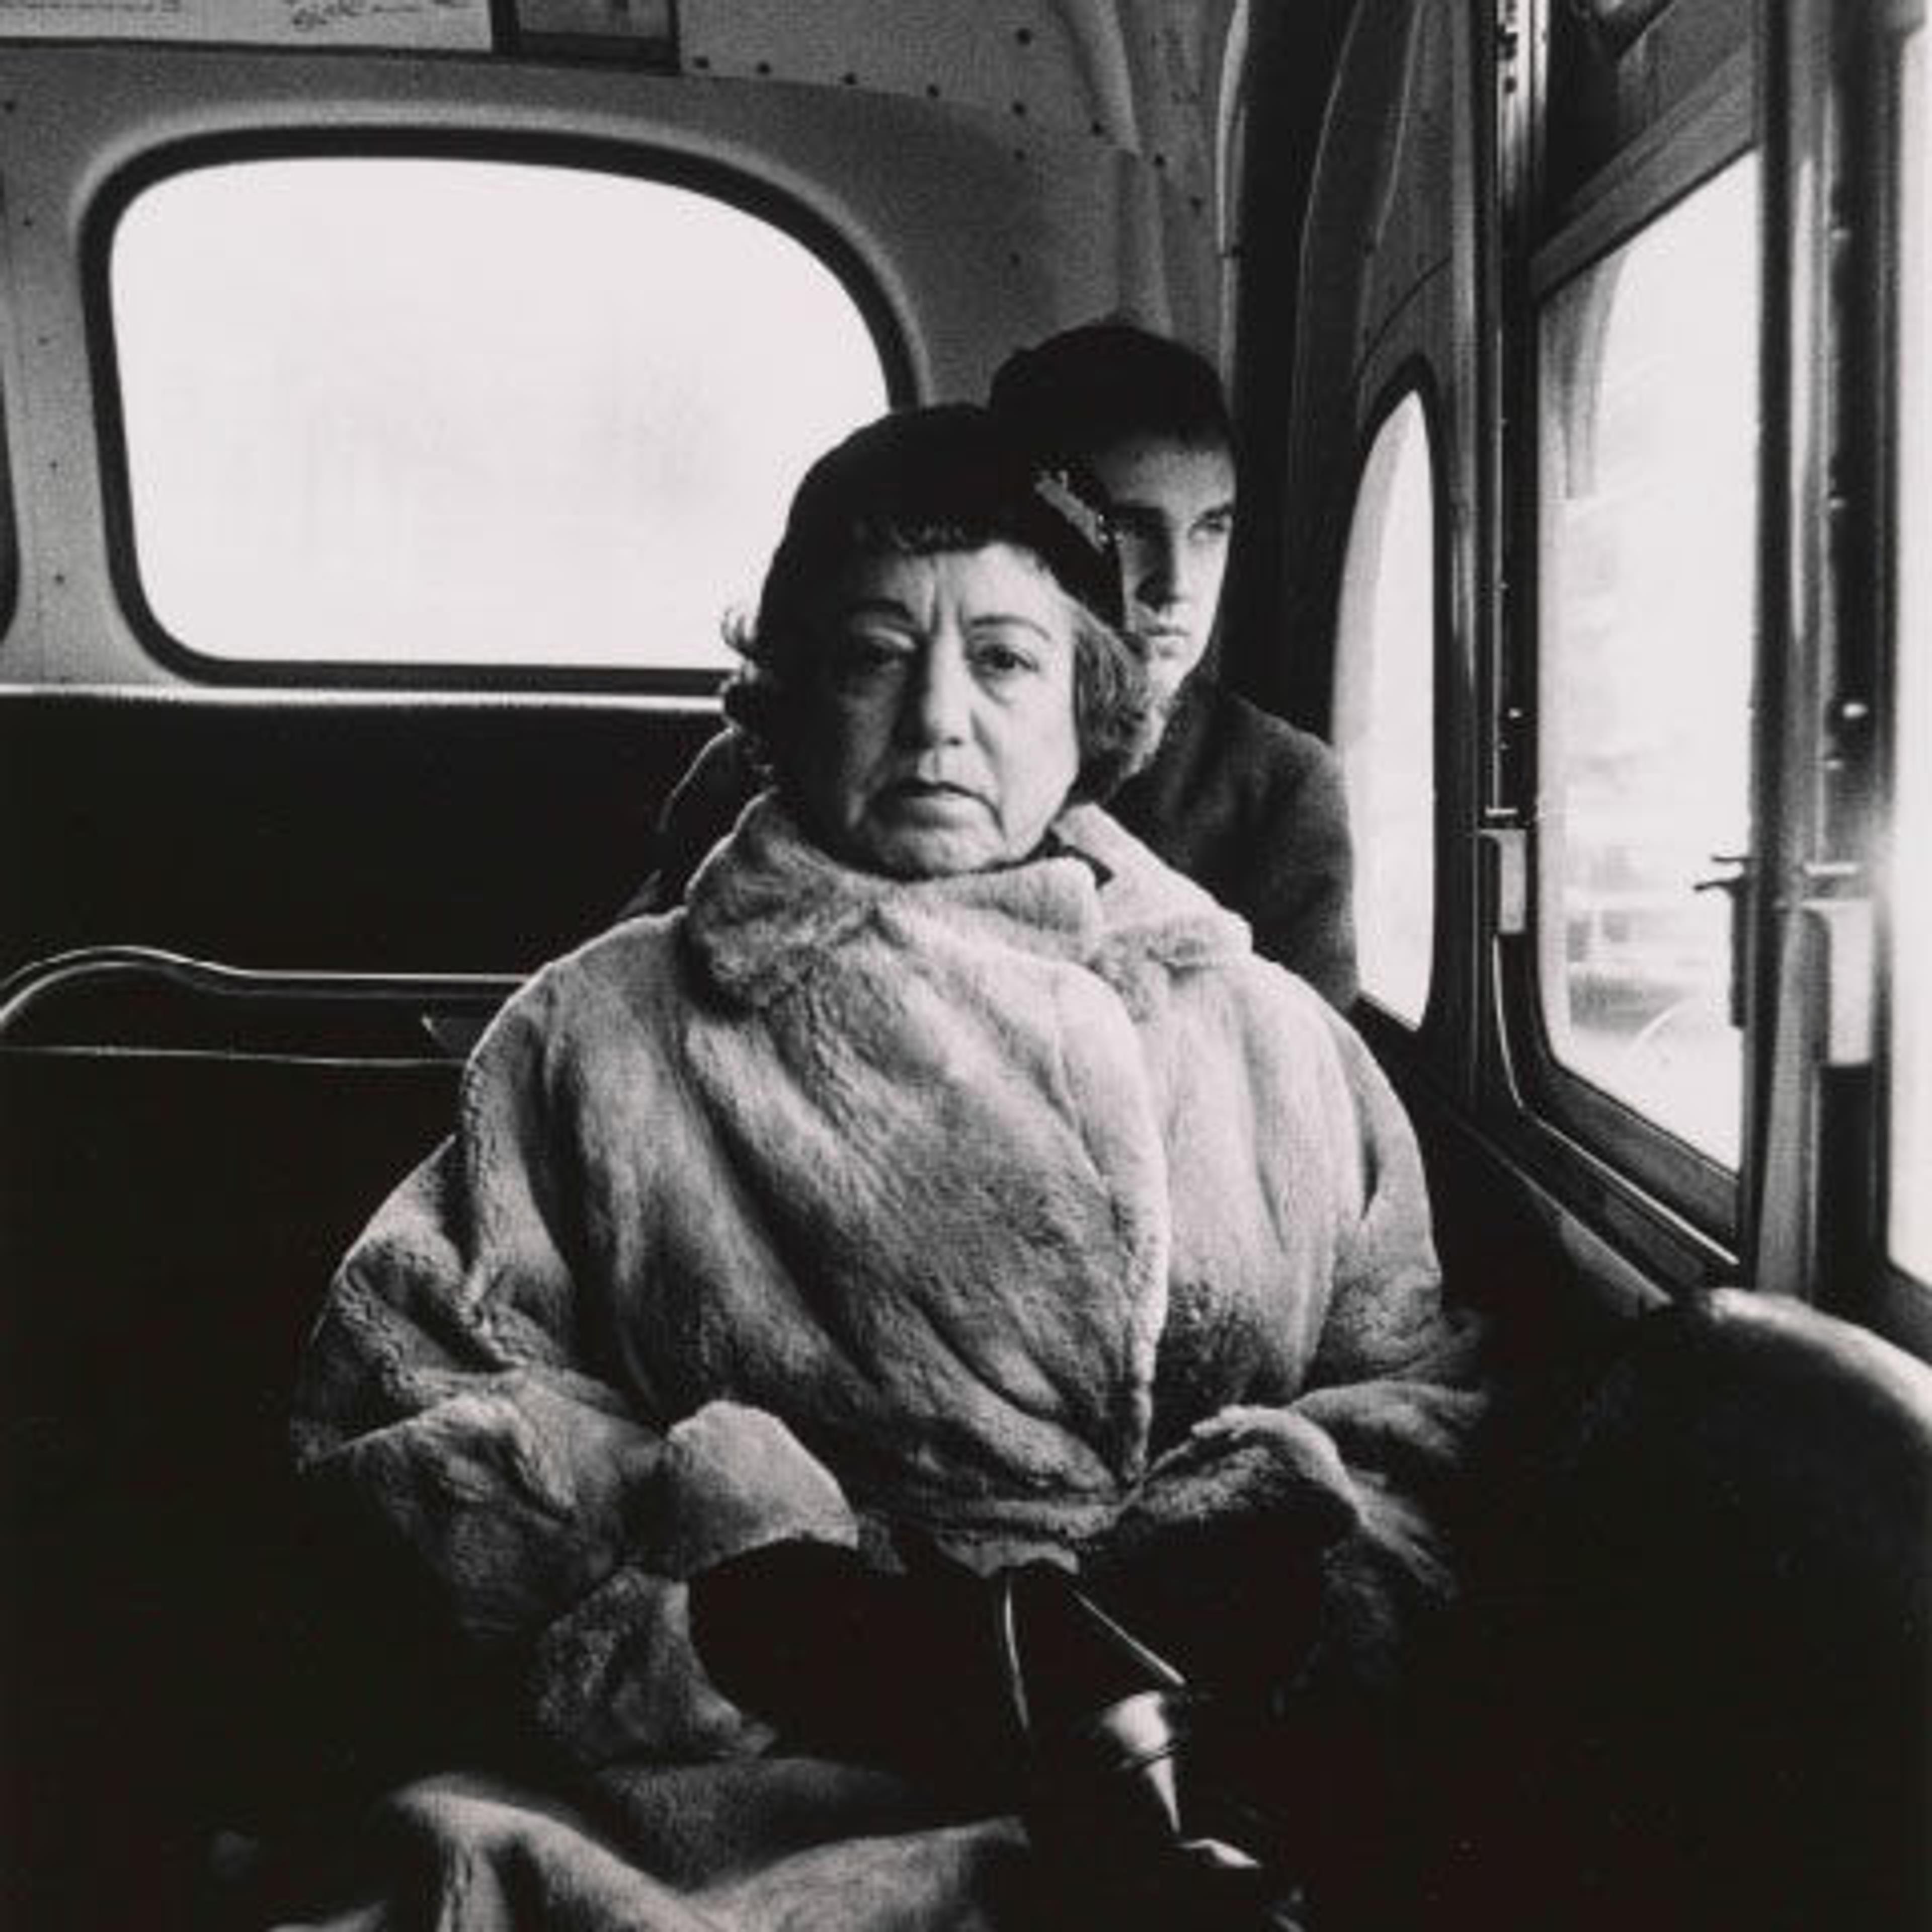 Black-and-white photograph of a woman on a bus